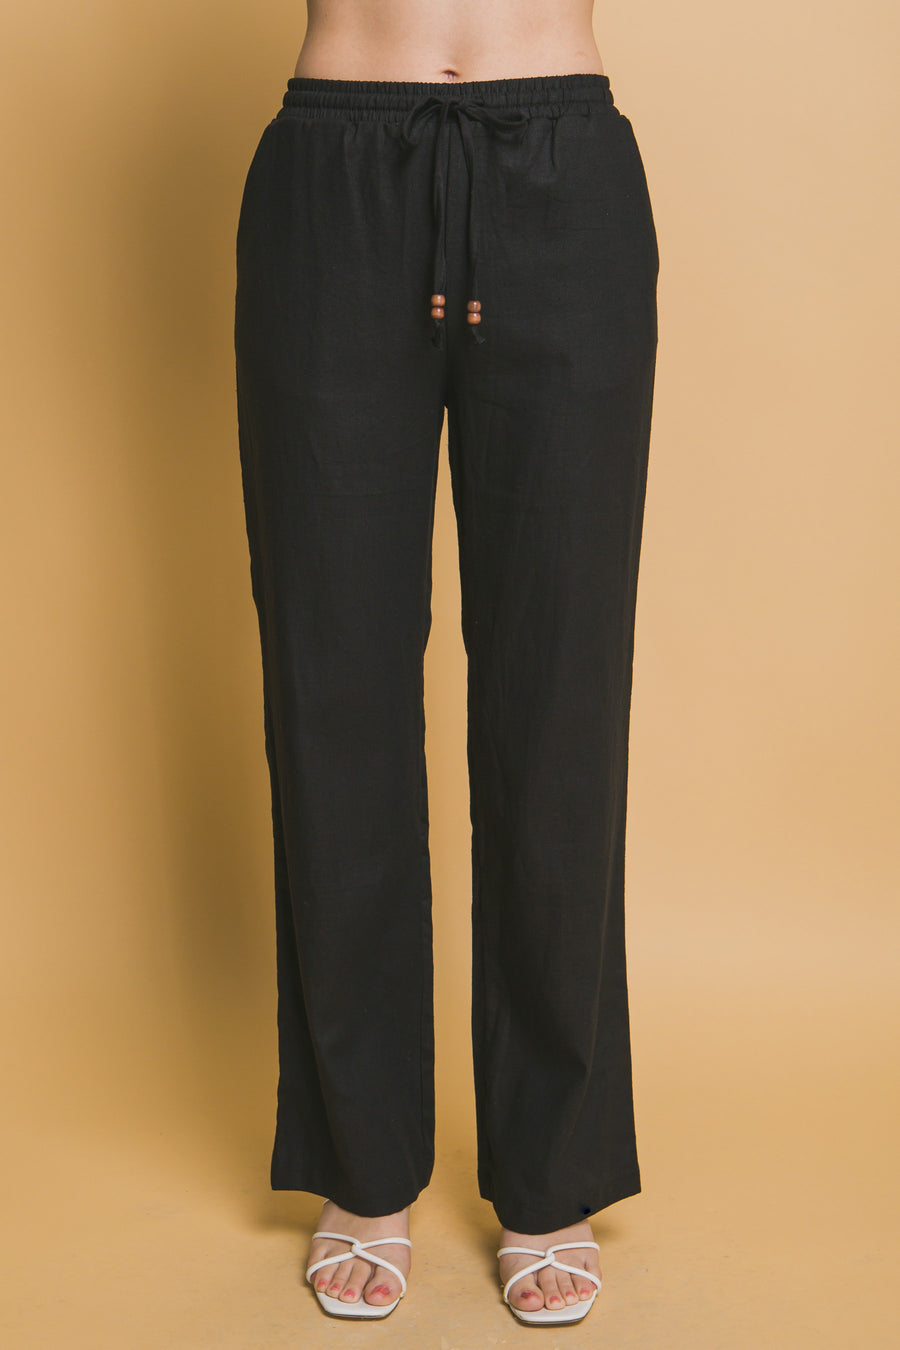 Featuring a straight leg linen pant with an elastic waist band and a tie front with added beaded detail in the color black